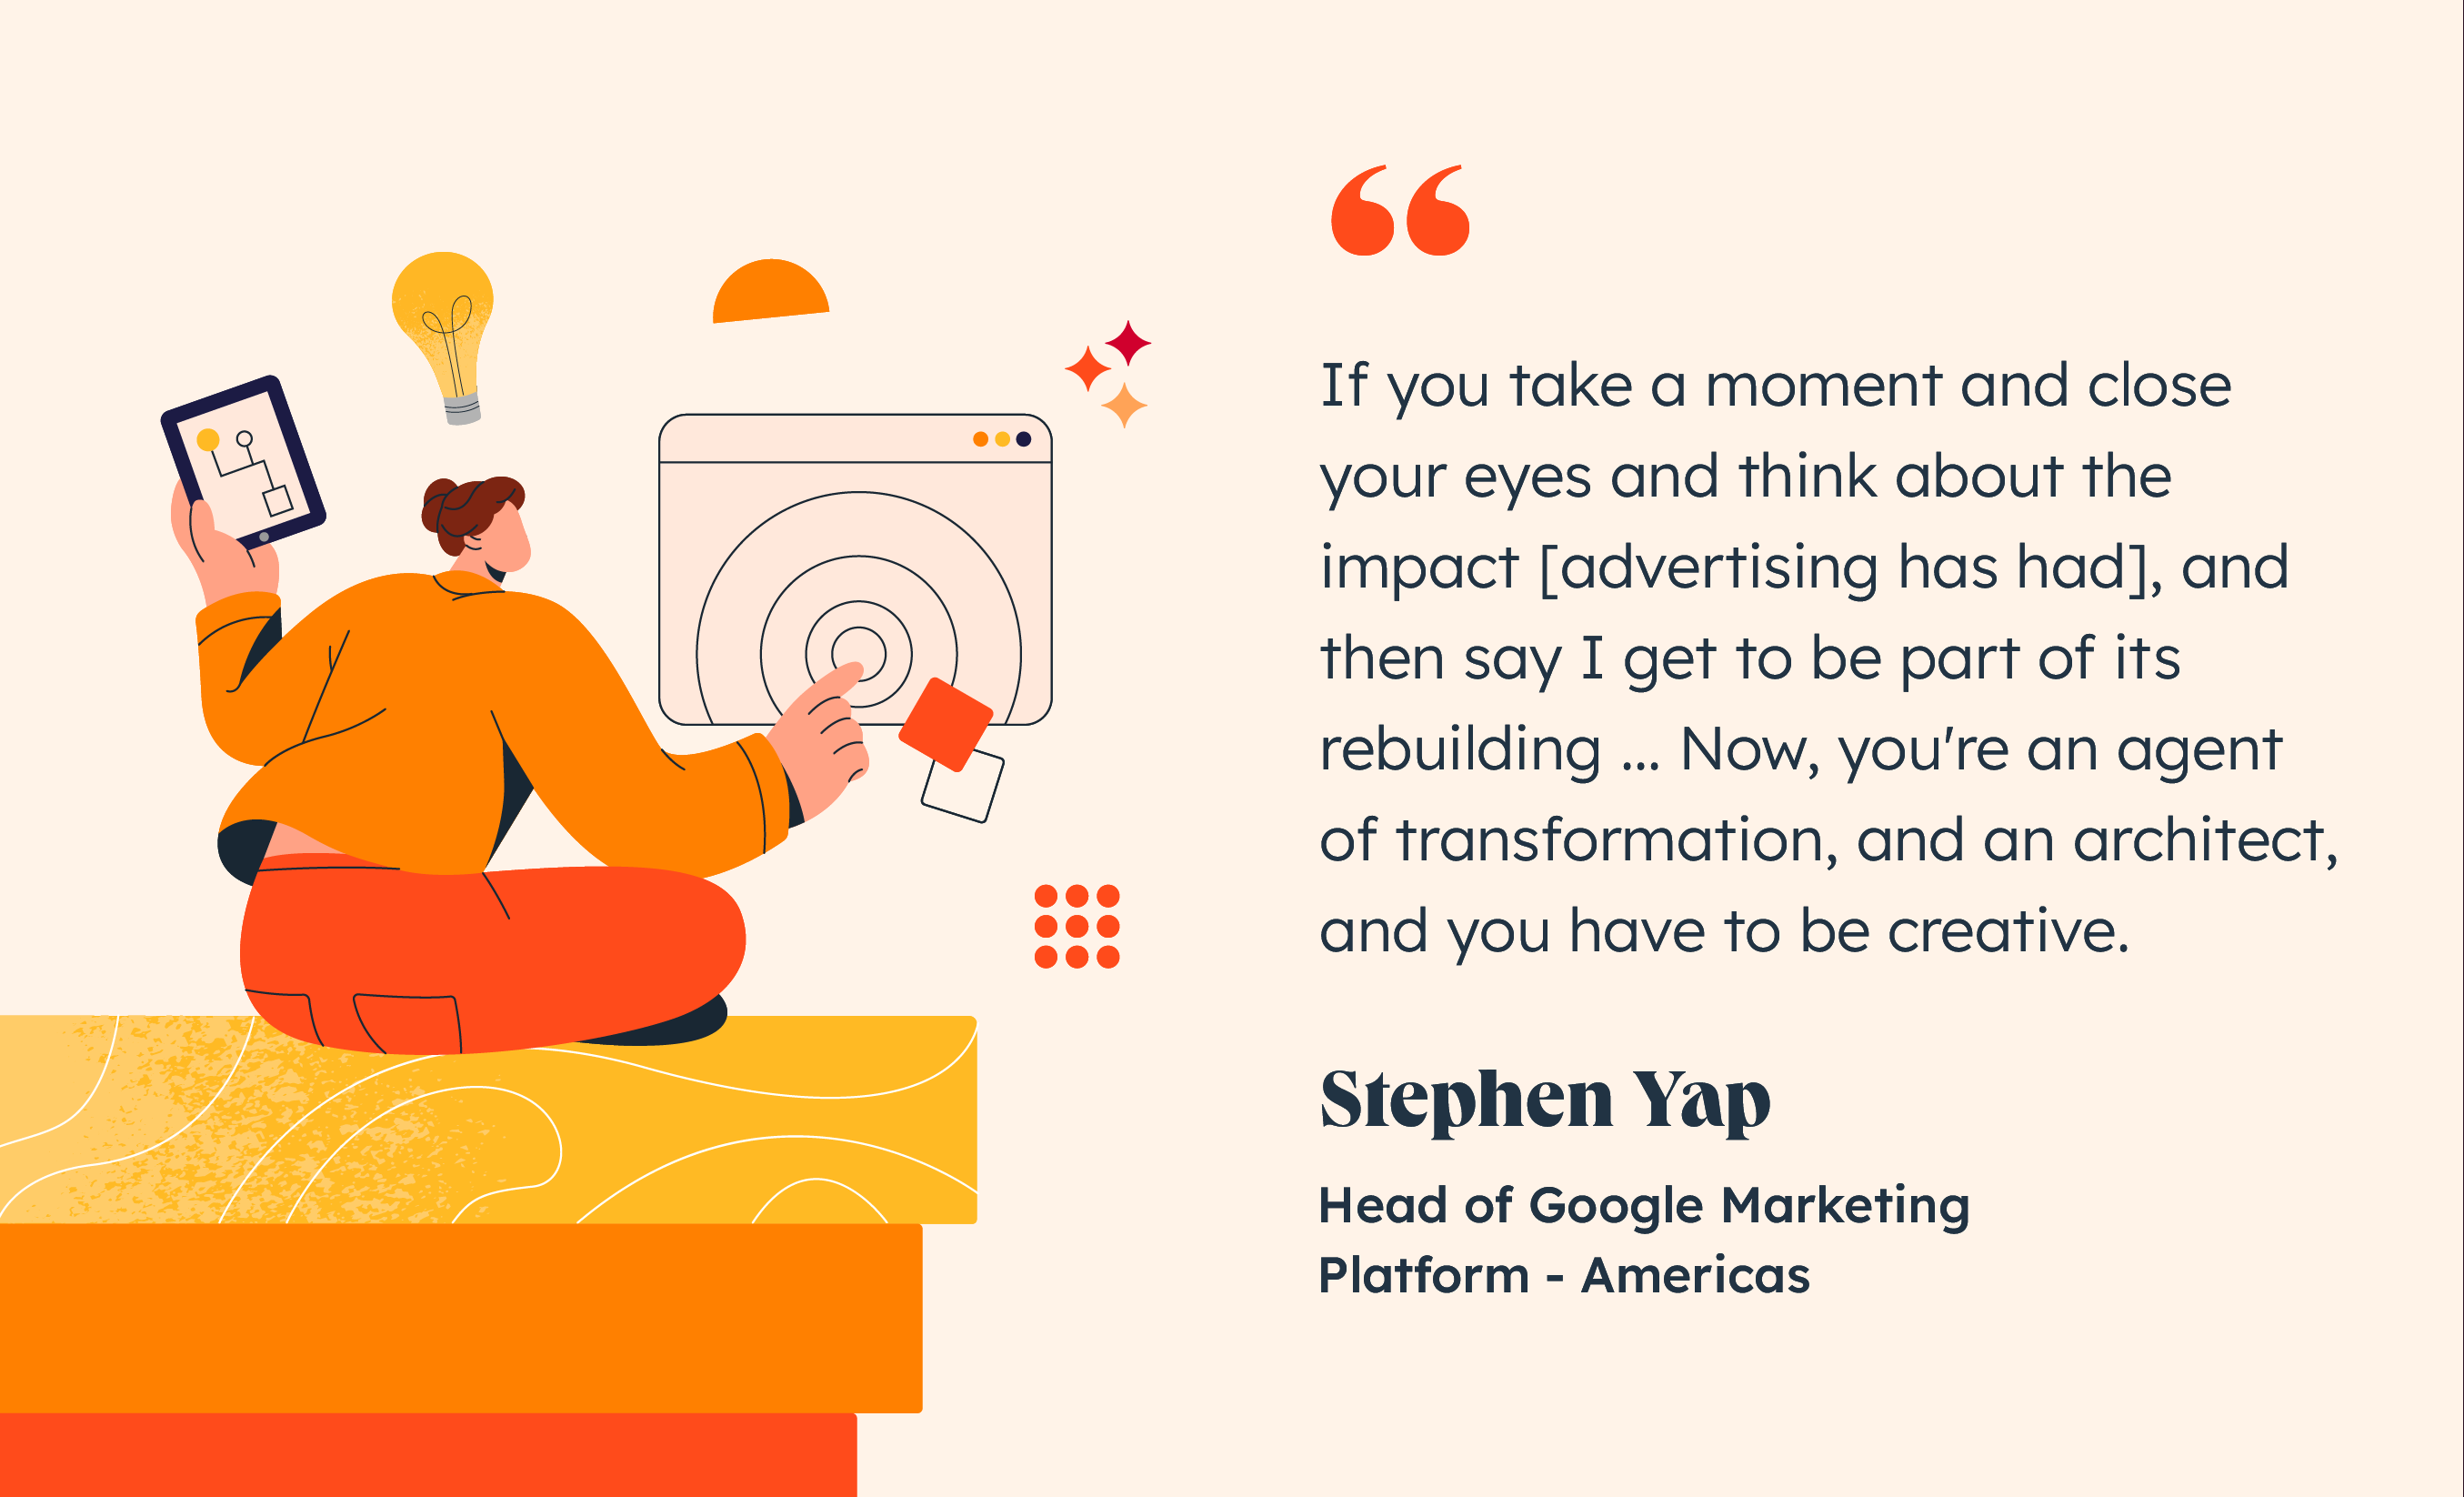 Stephen%20Yap%20about%20the%20future%20of%20advertising.png?width=2710&height=1646&name=Stephen%20Yap%20about%20the%20future%20of%20advertising - Google&#039;s Head of Technology Platforms On How First-Party Data &amp; AI Will Transform The Ad Industry — For The Better